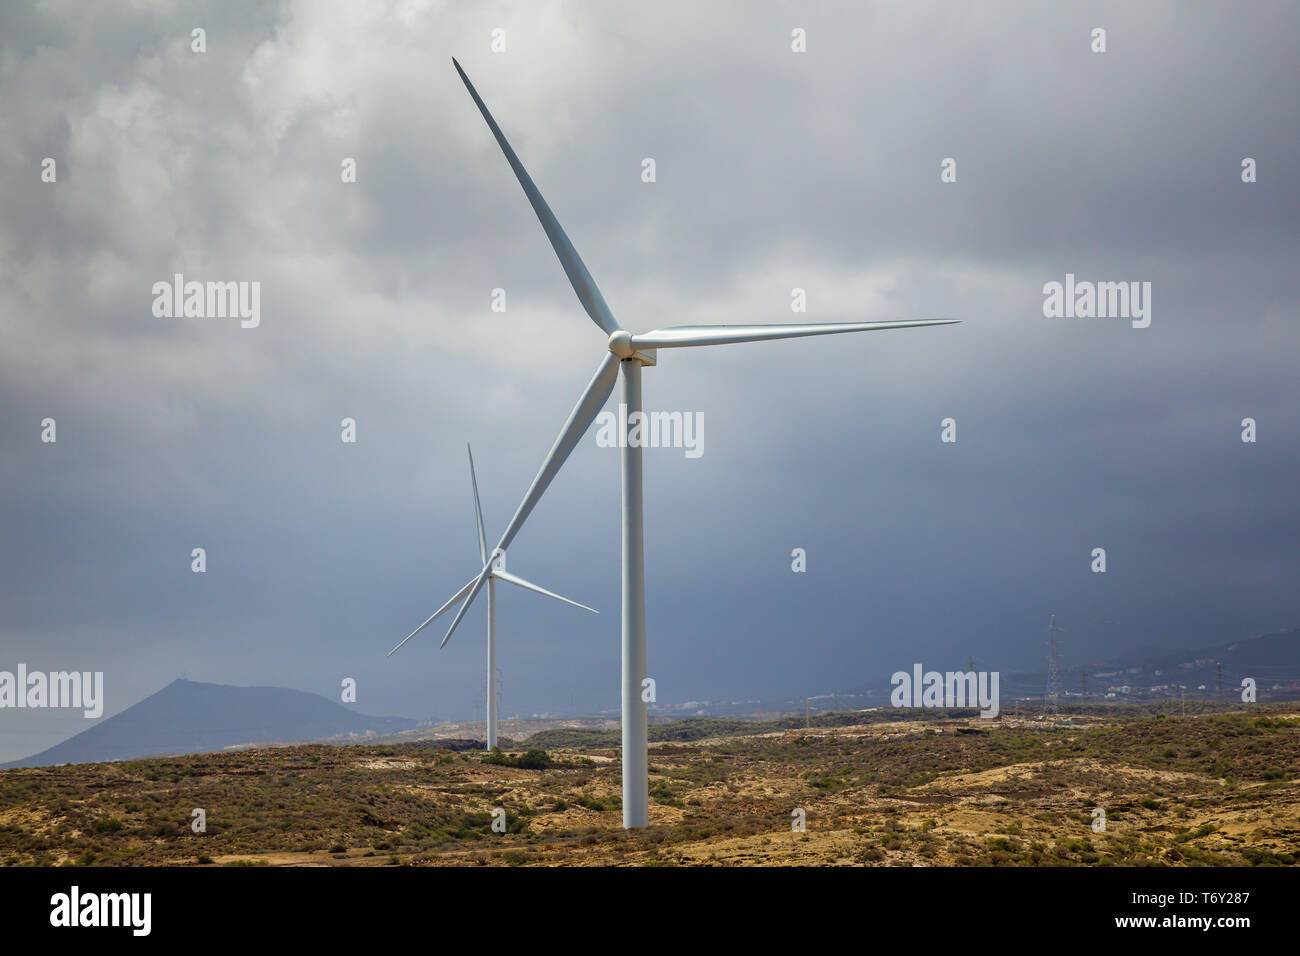 Wind turbines on the island as an ecological source of cheap energy. Tenerife, Canary Islands, Spain Stock Photo